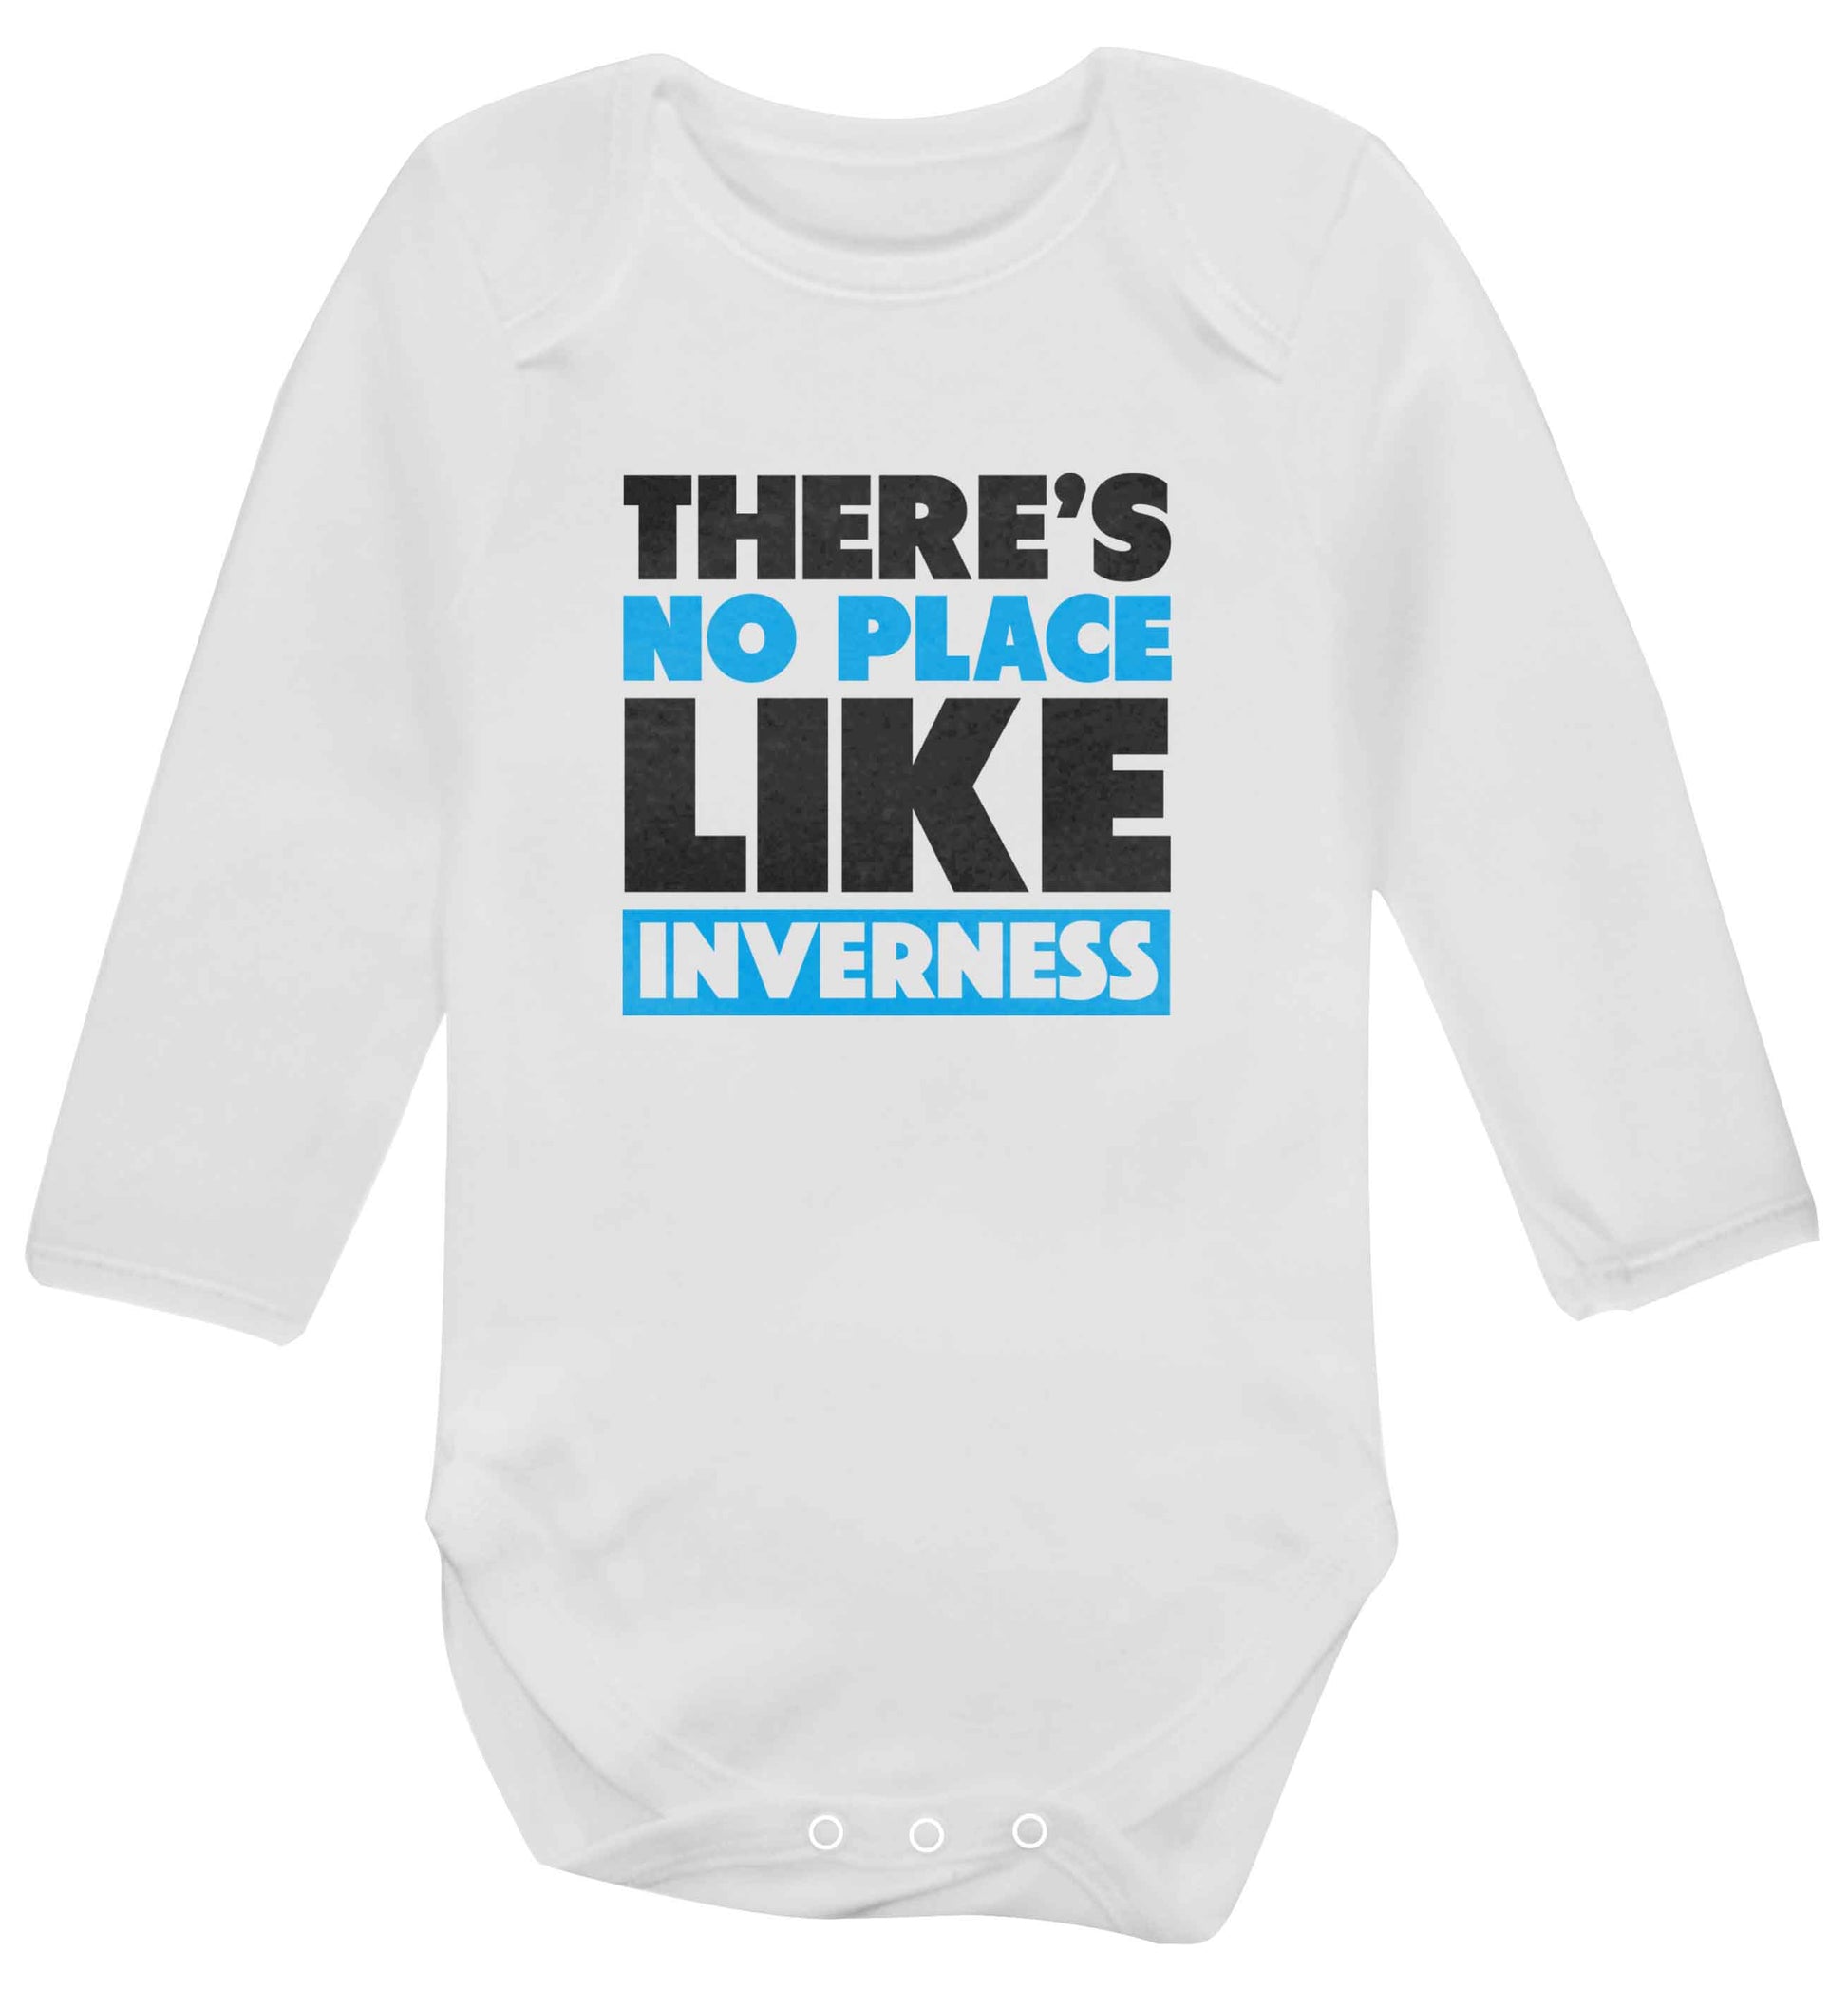 There's no place like Inverness baby vest long sleeved white 6-12 months